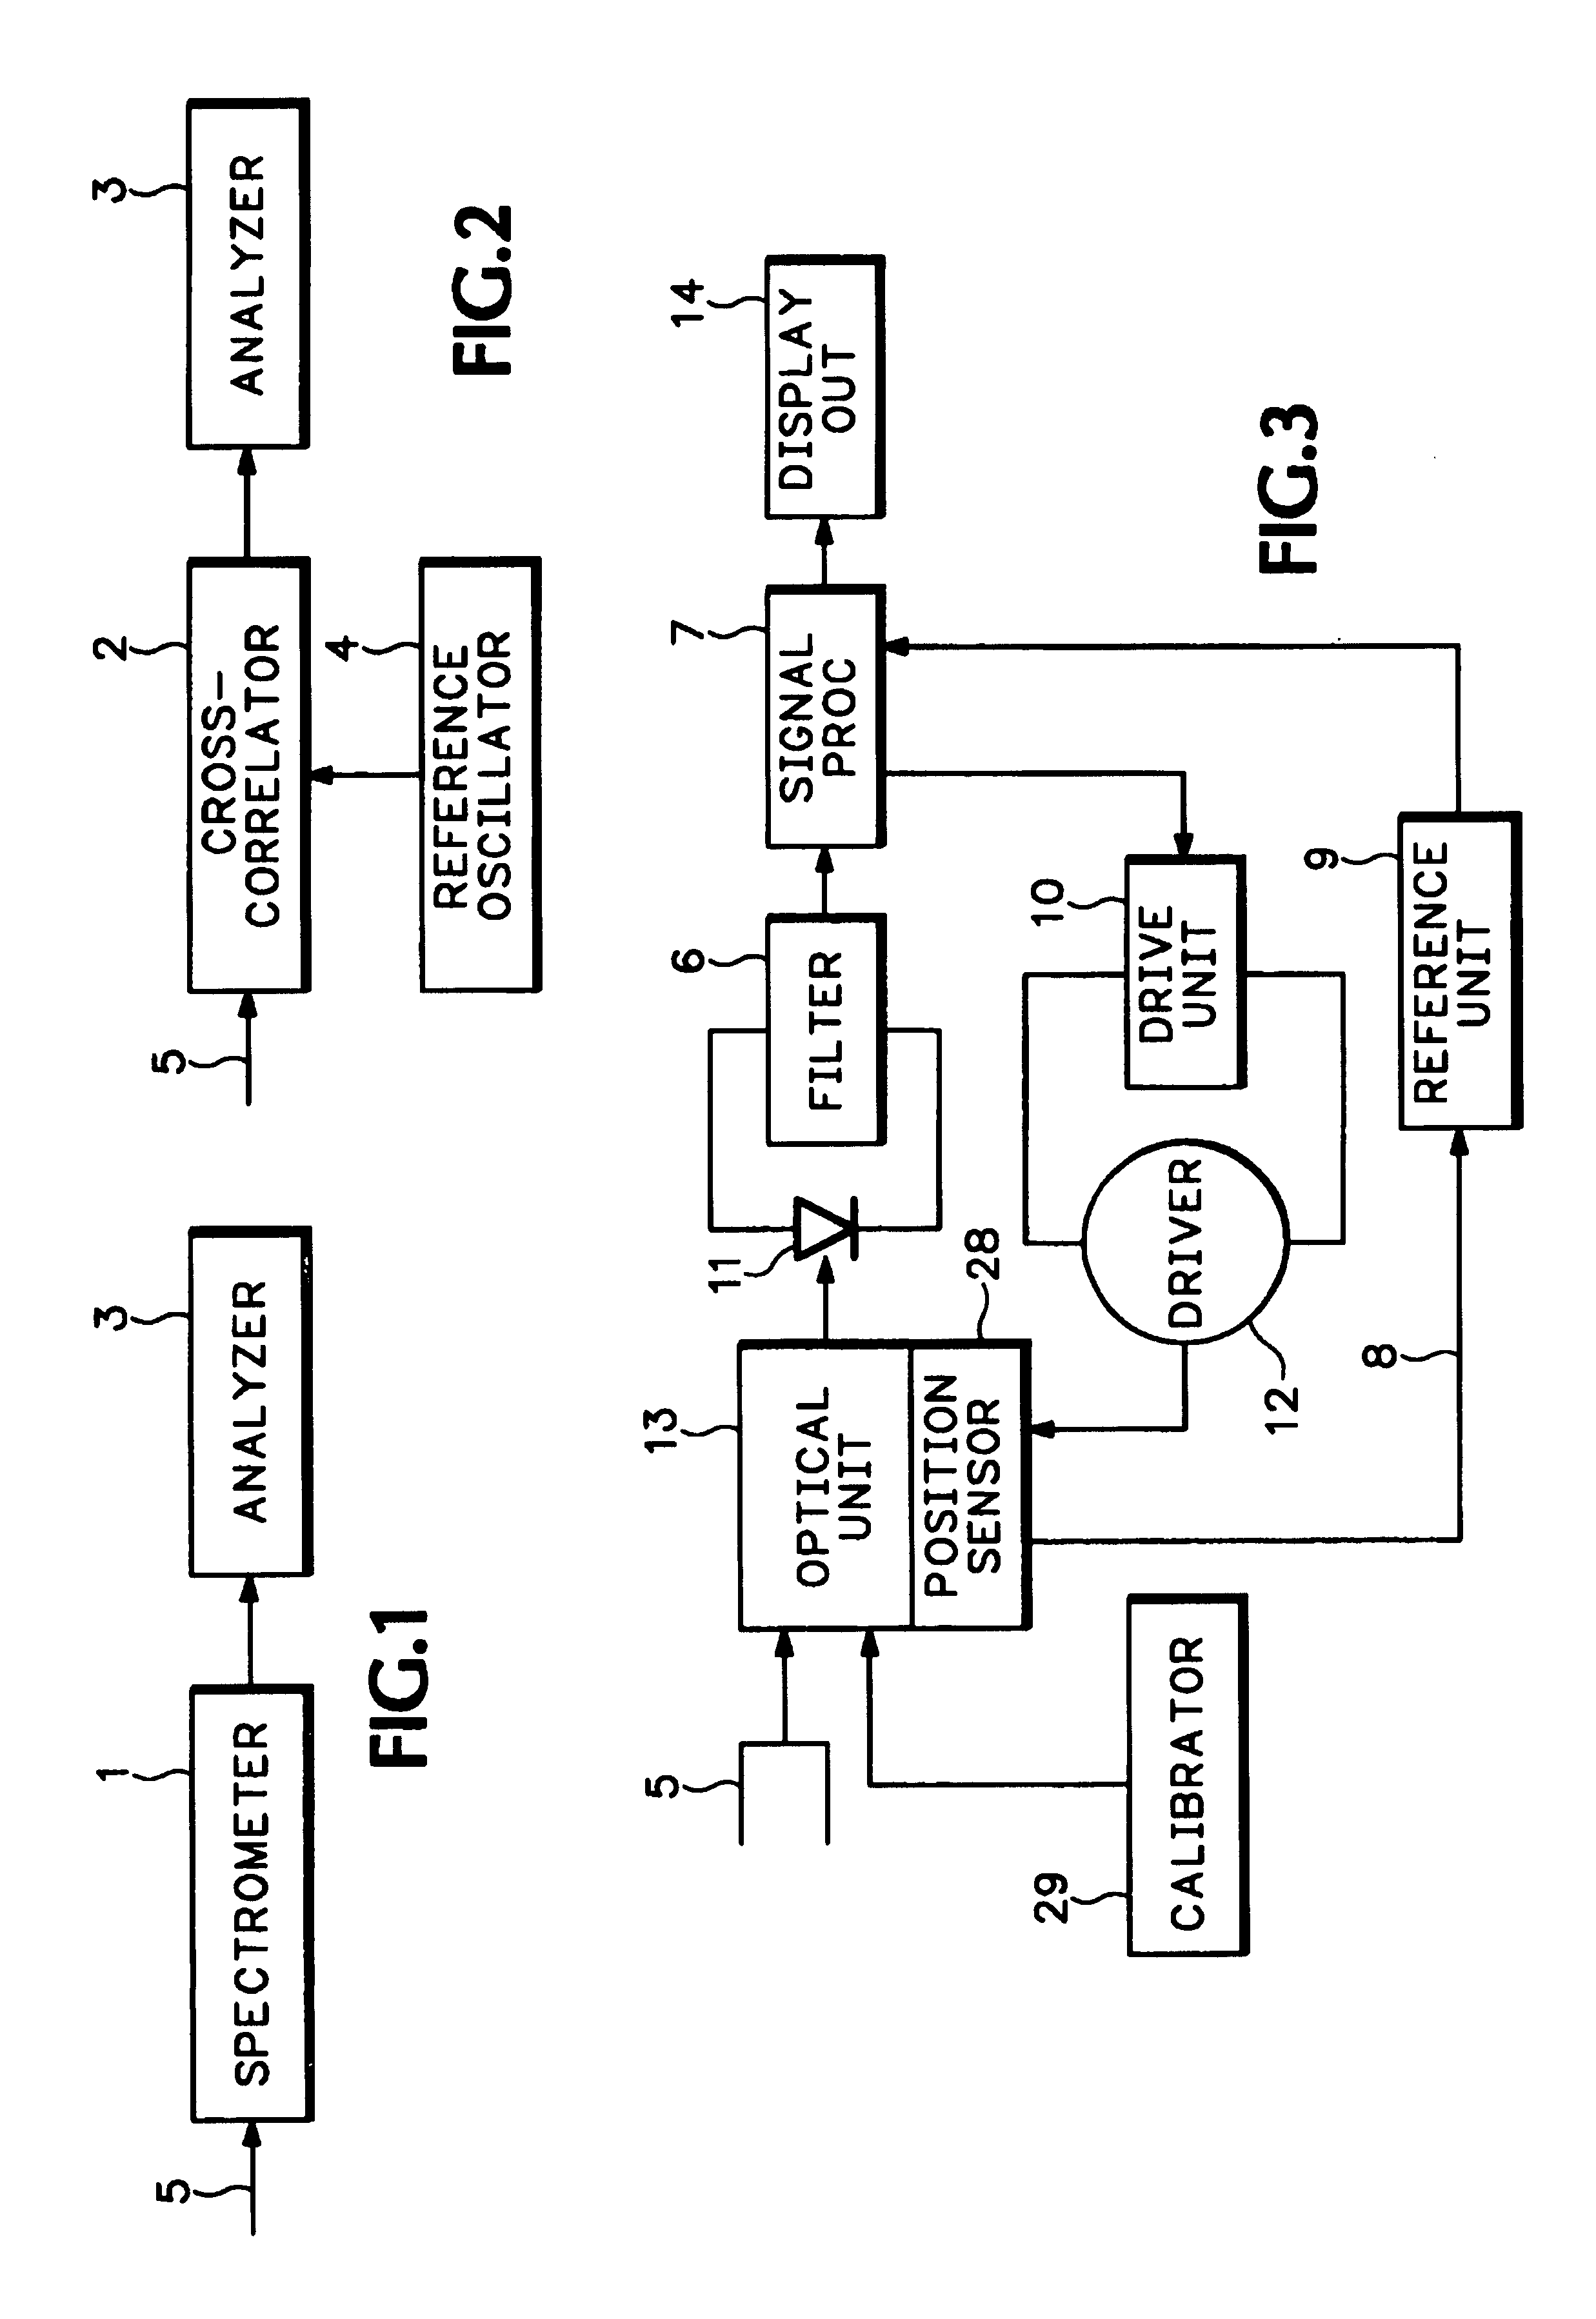 System and method for monitoring the performance of dense wavelength division multiplexing optical communications systems